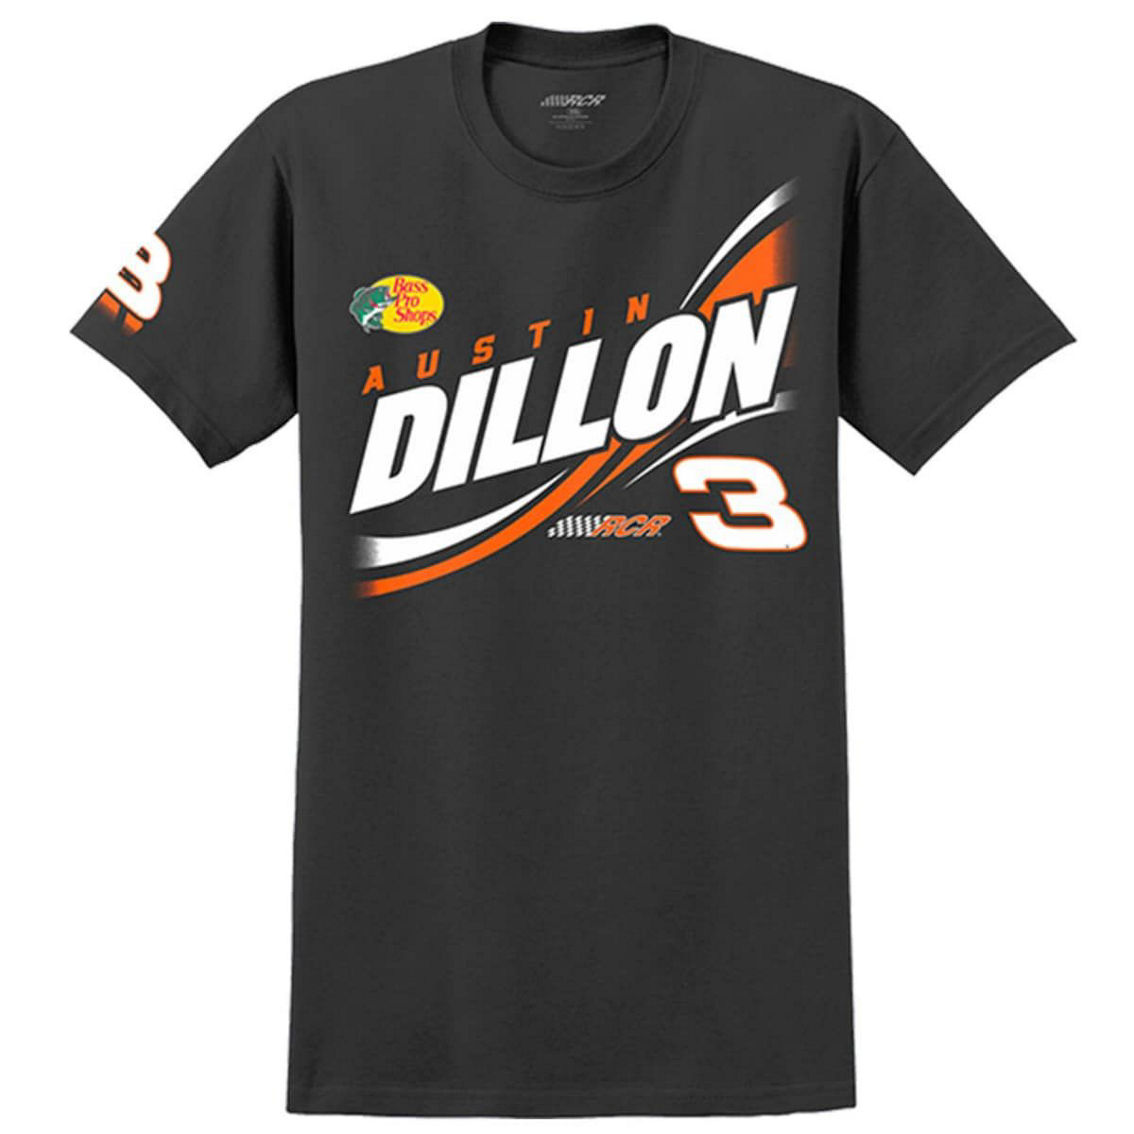 Richard Childress Racing Team Collection Men's Richard Childress Racing Team Collection Black Austin Dillon Lifestyle T-Shirt - Image 3 of 4